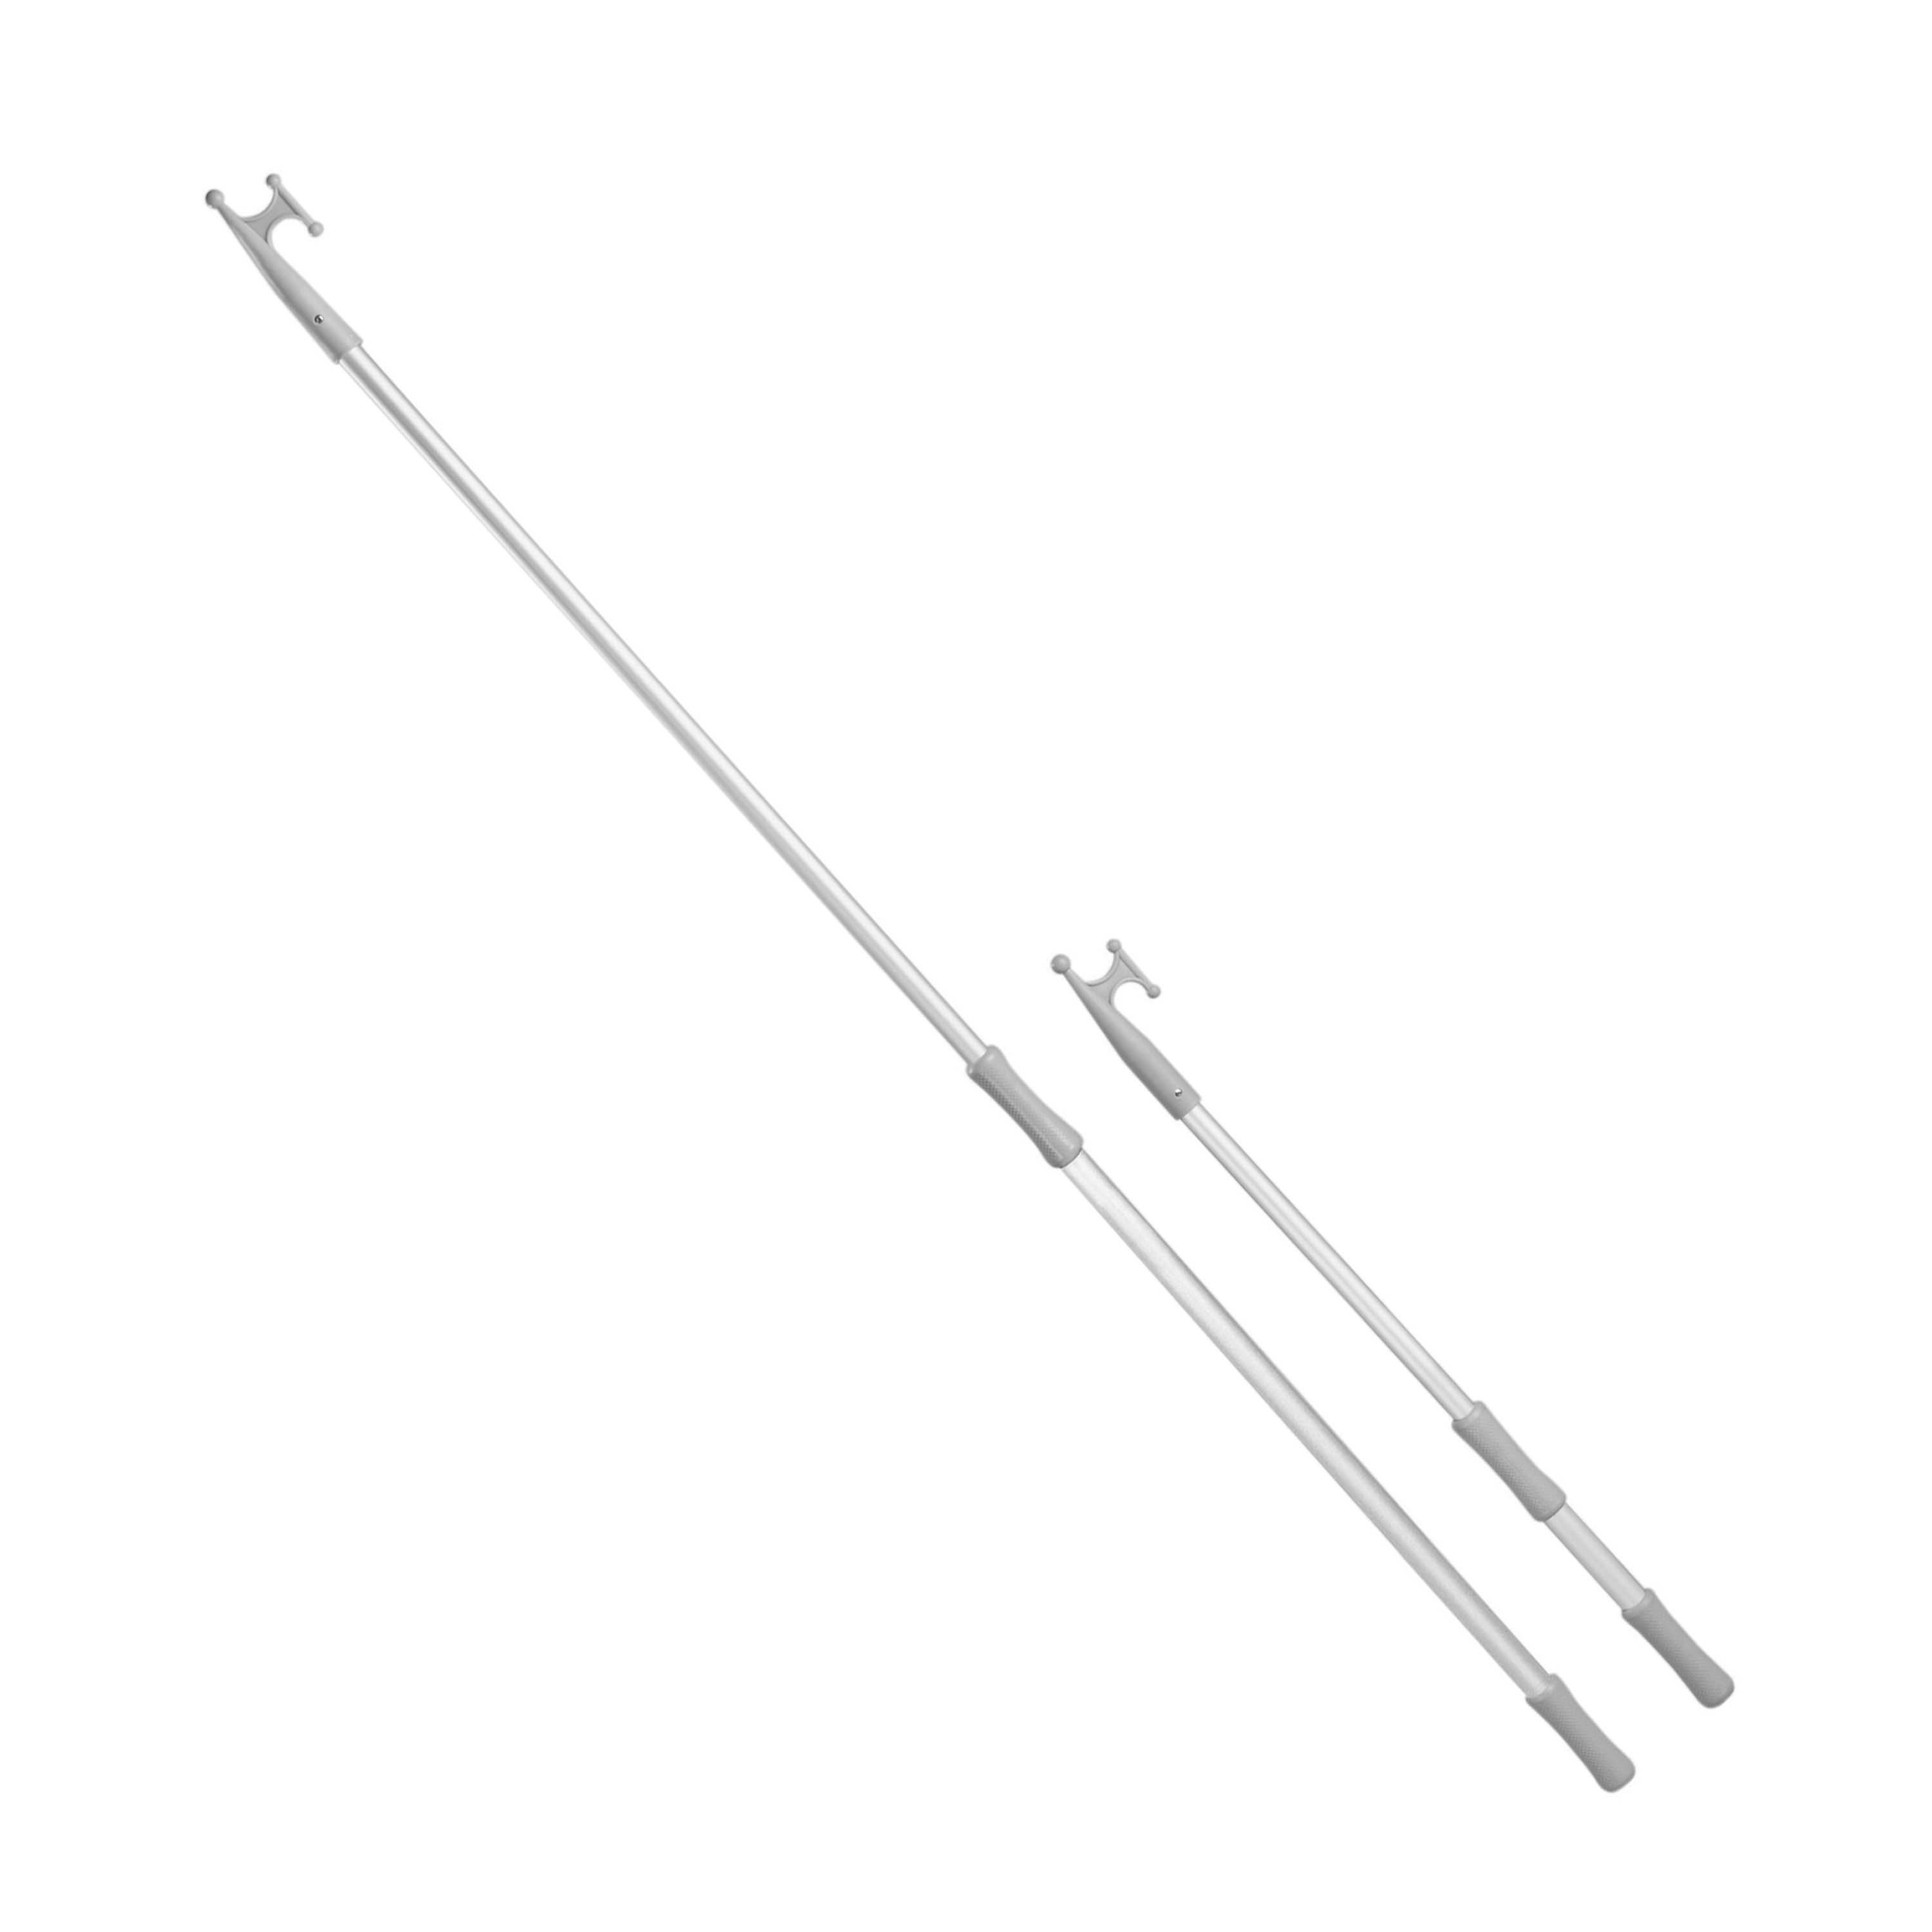 TELESCOPIC BOAT HOOK 120/210 cm made from anodised alloy PLASTIMO